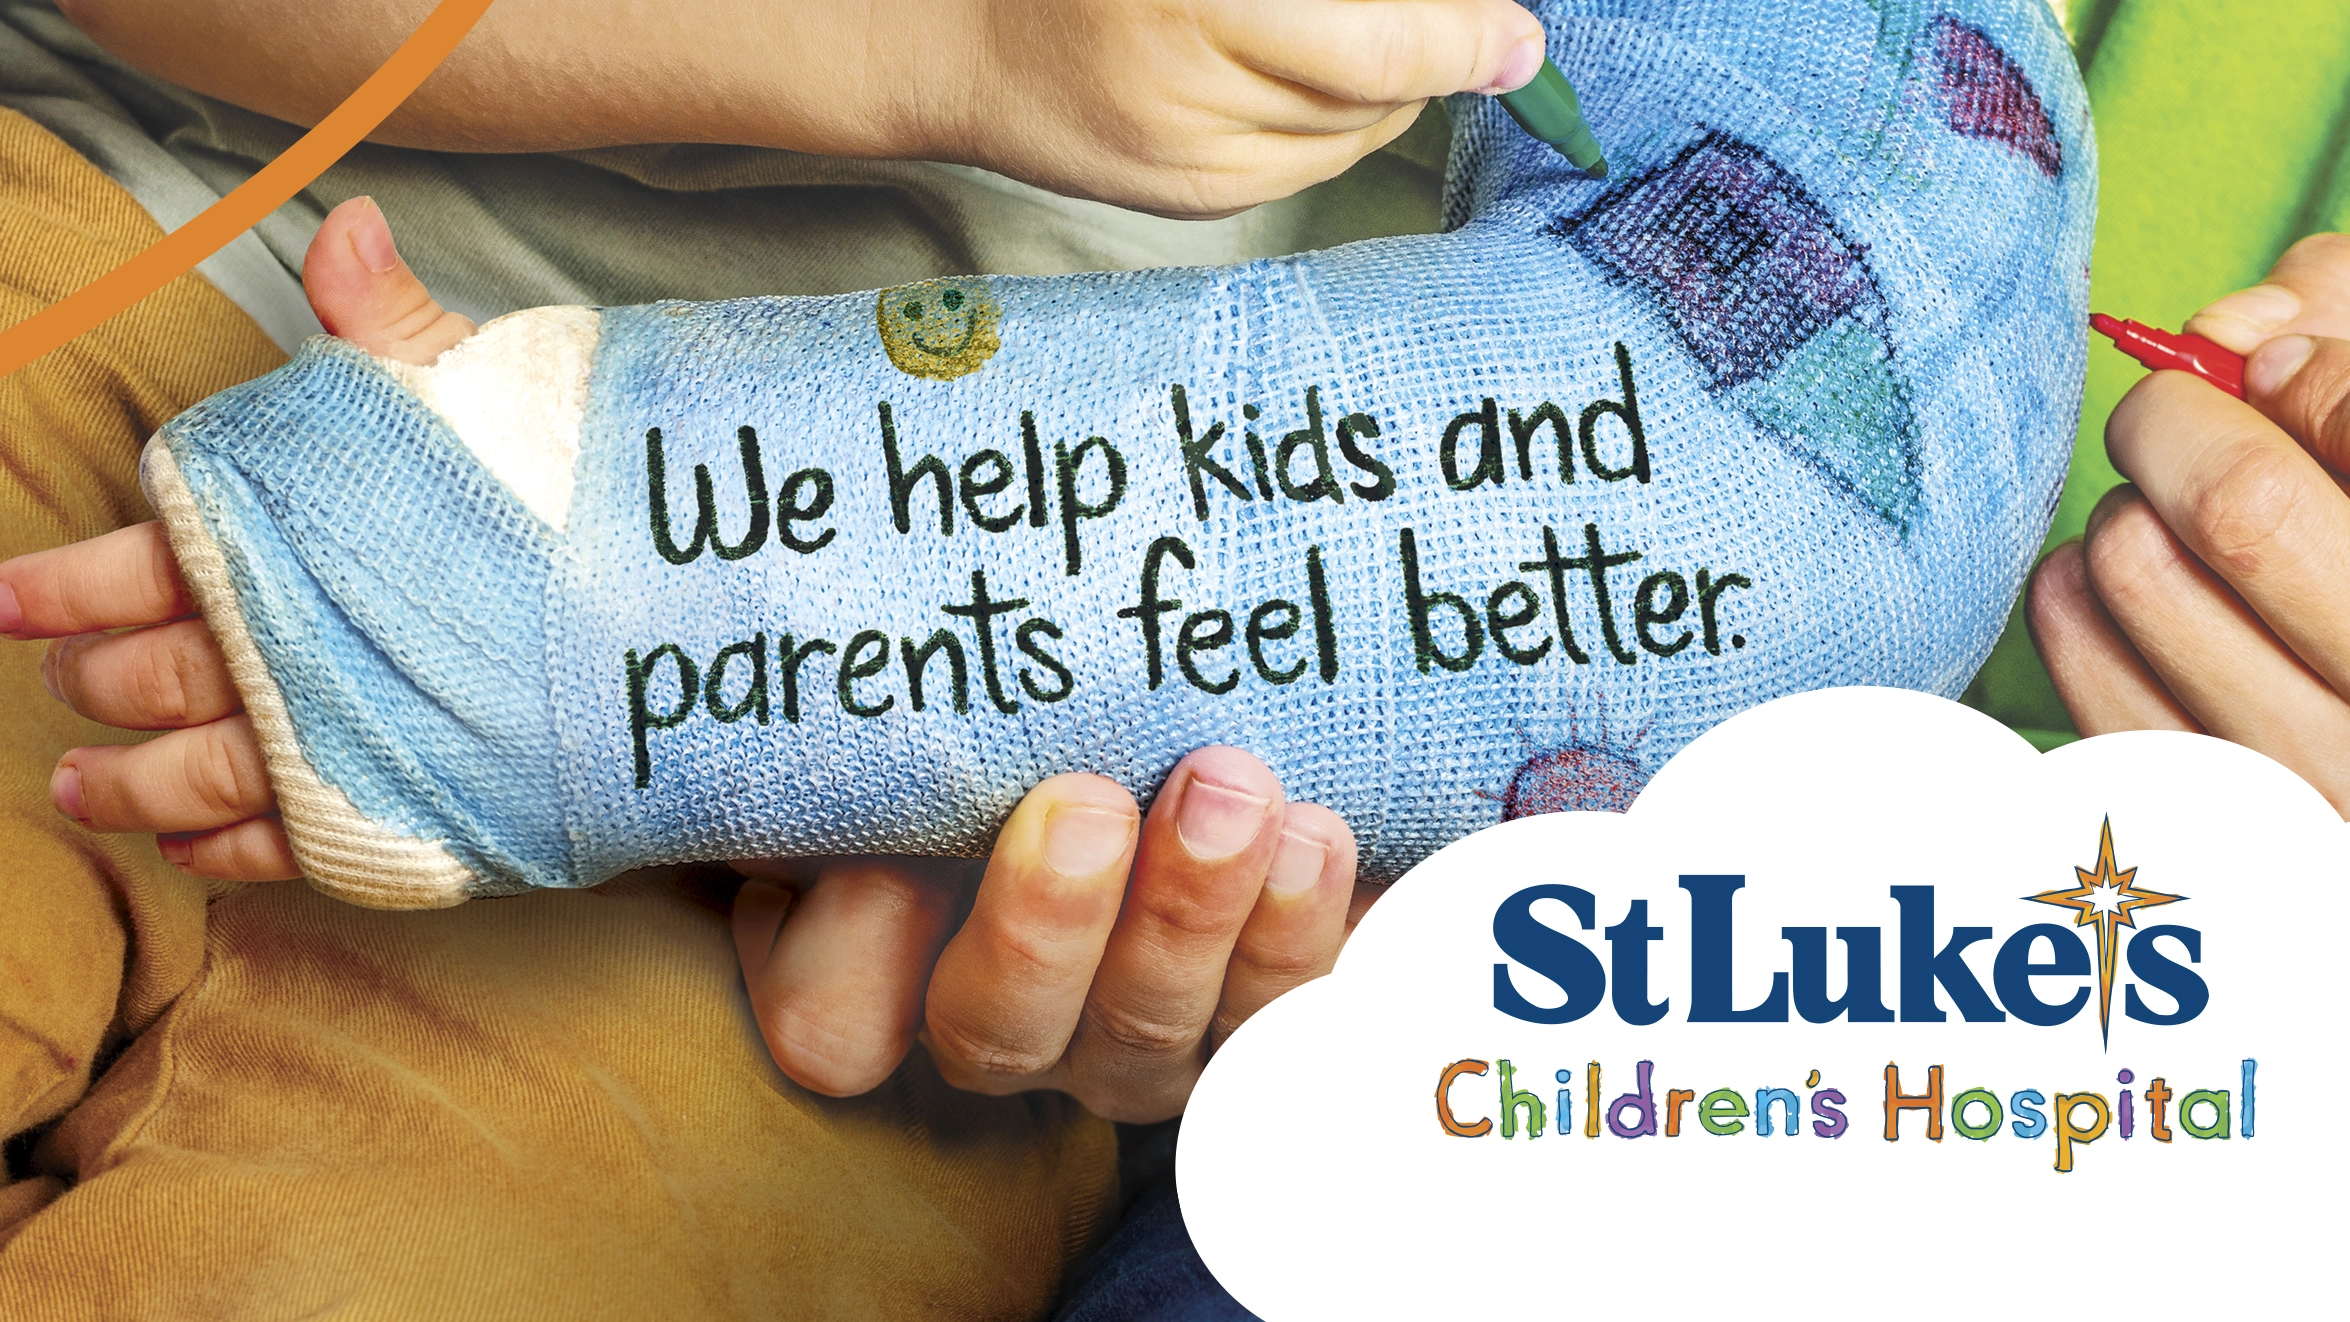 We help kids and parents feel better.